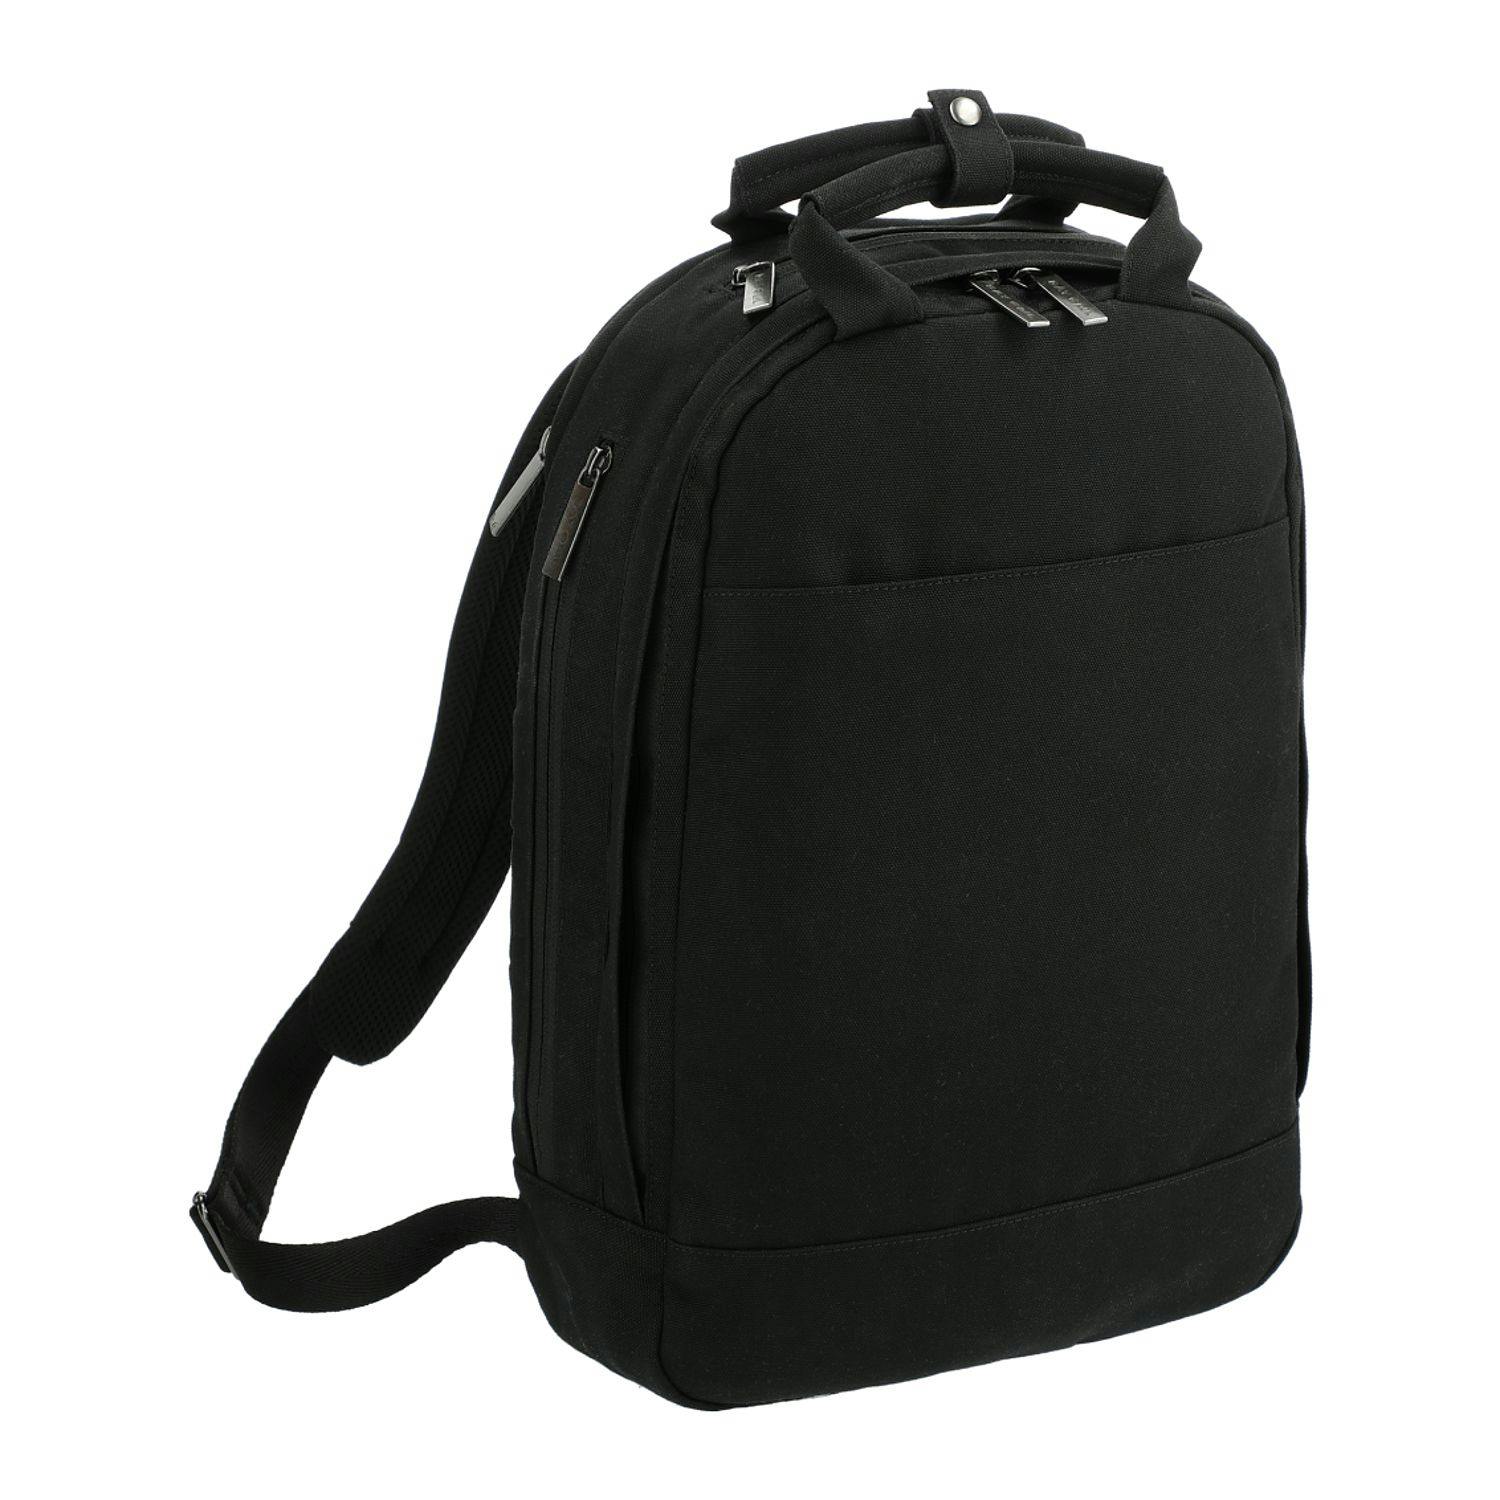 Day Owl Slim 14" Computer Backpack - additional Image 1